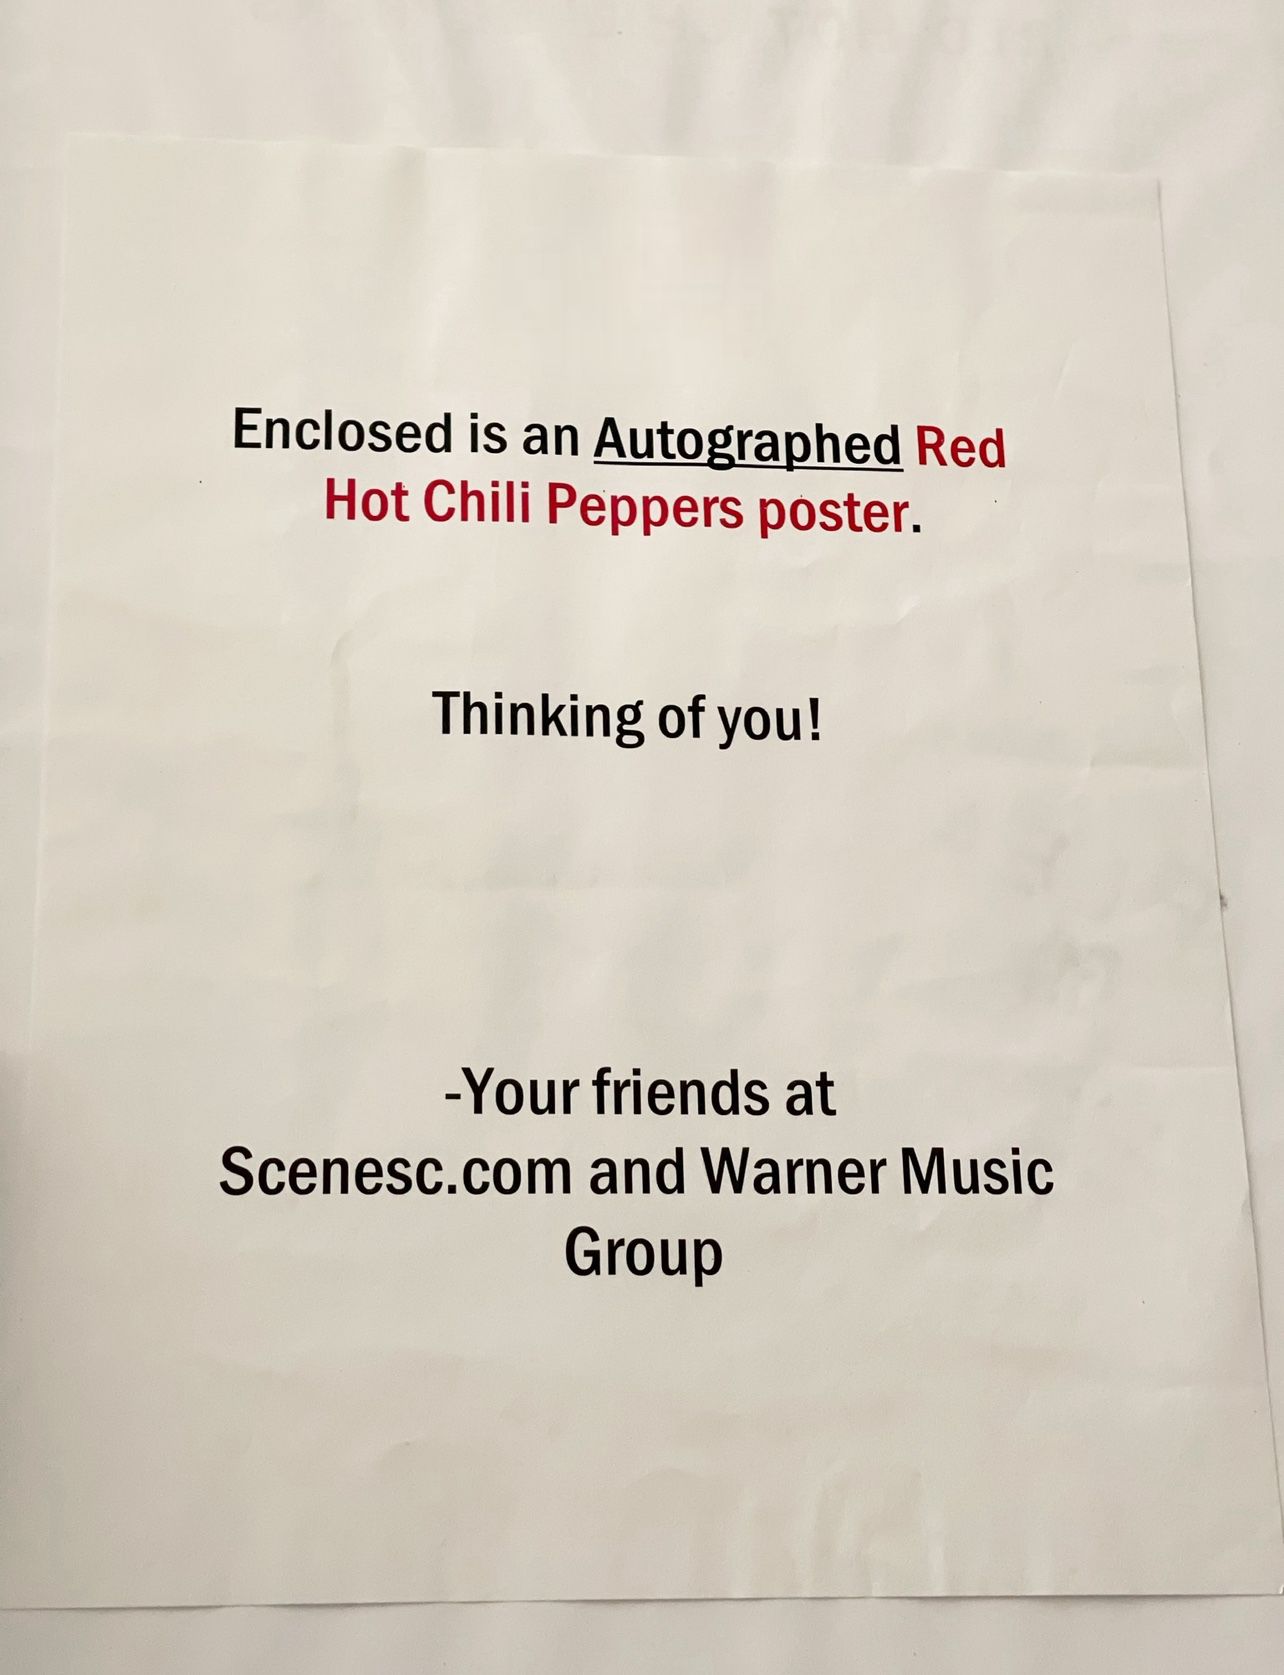 Red Hot Chili Peppers Signed Promotional Poster 